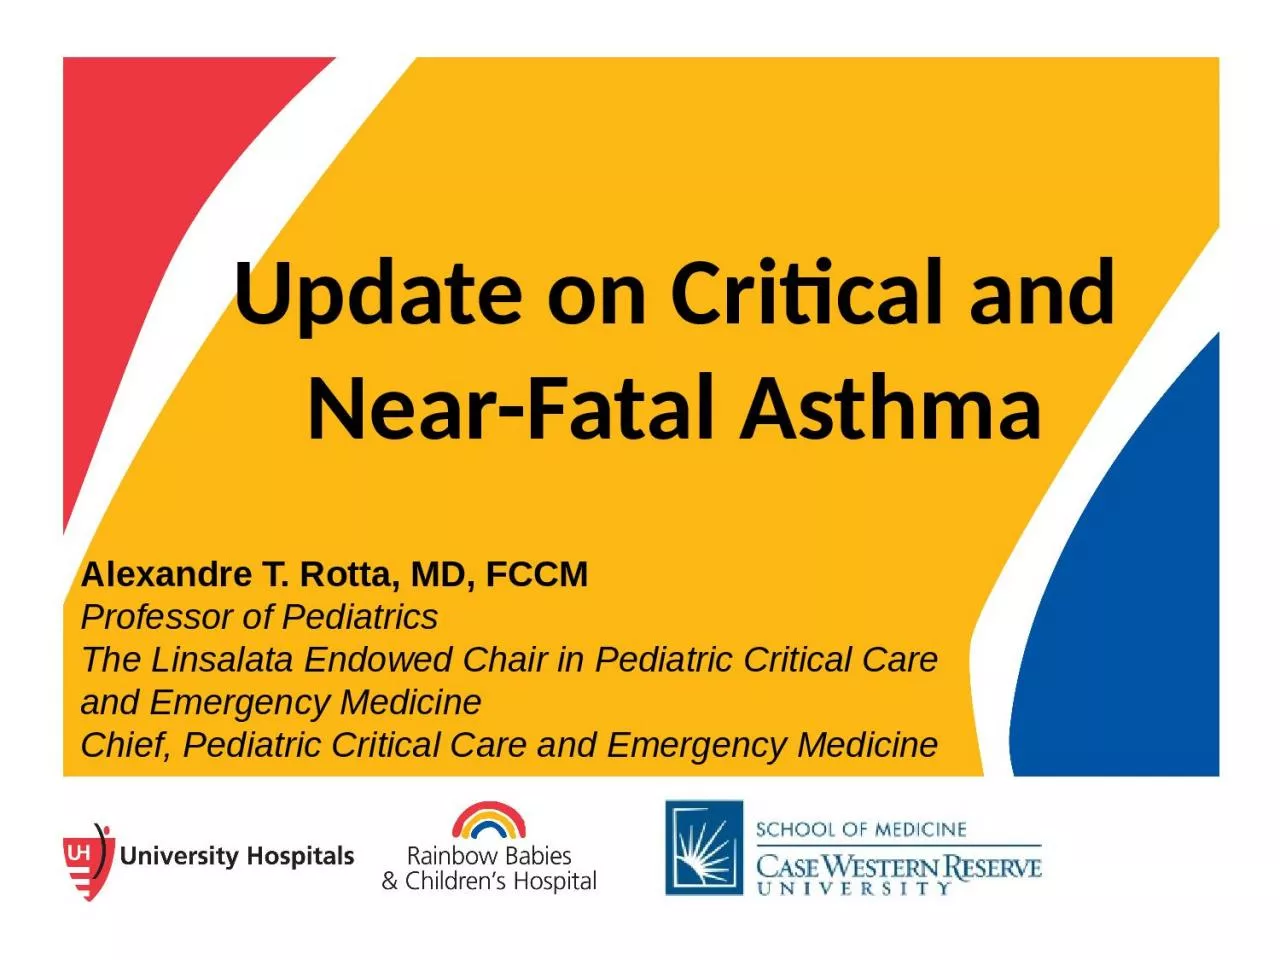 Update on Critical and Near-Fatal Asthma